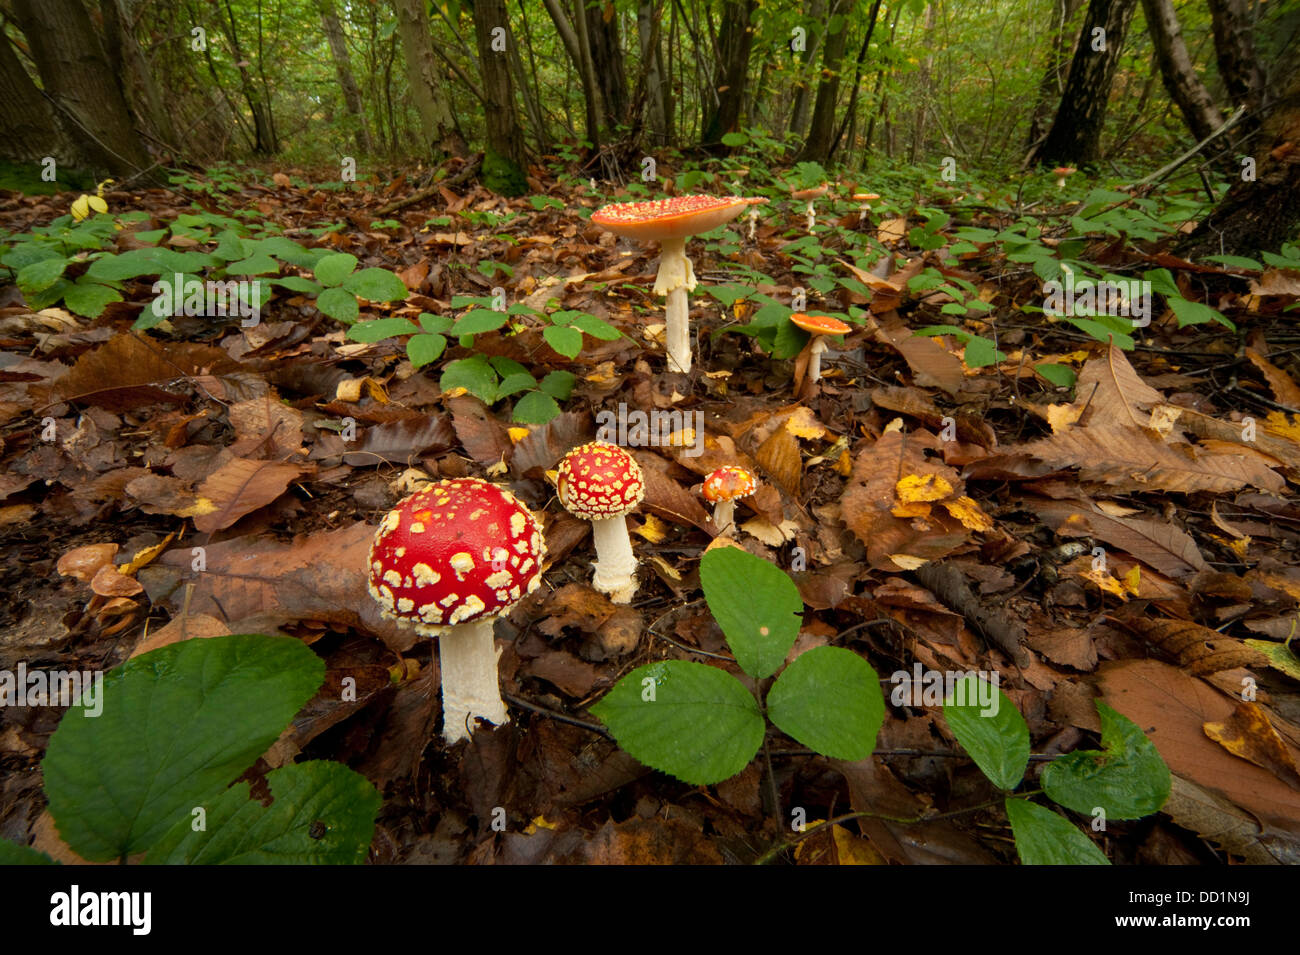 Agaric Fly, Amanita muscaria, Banque D'Images